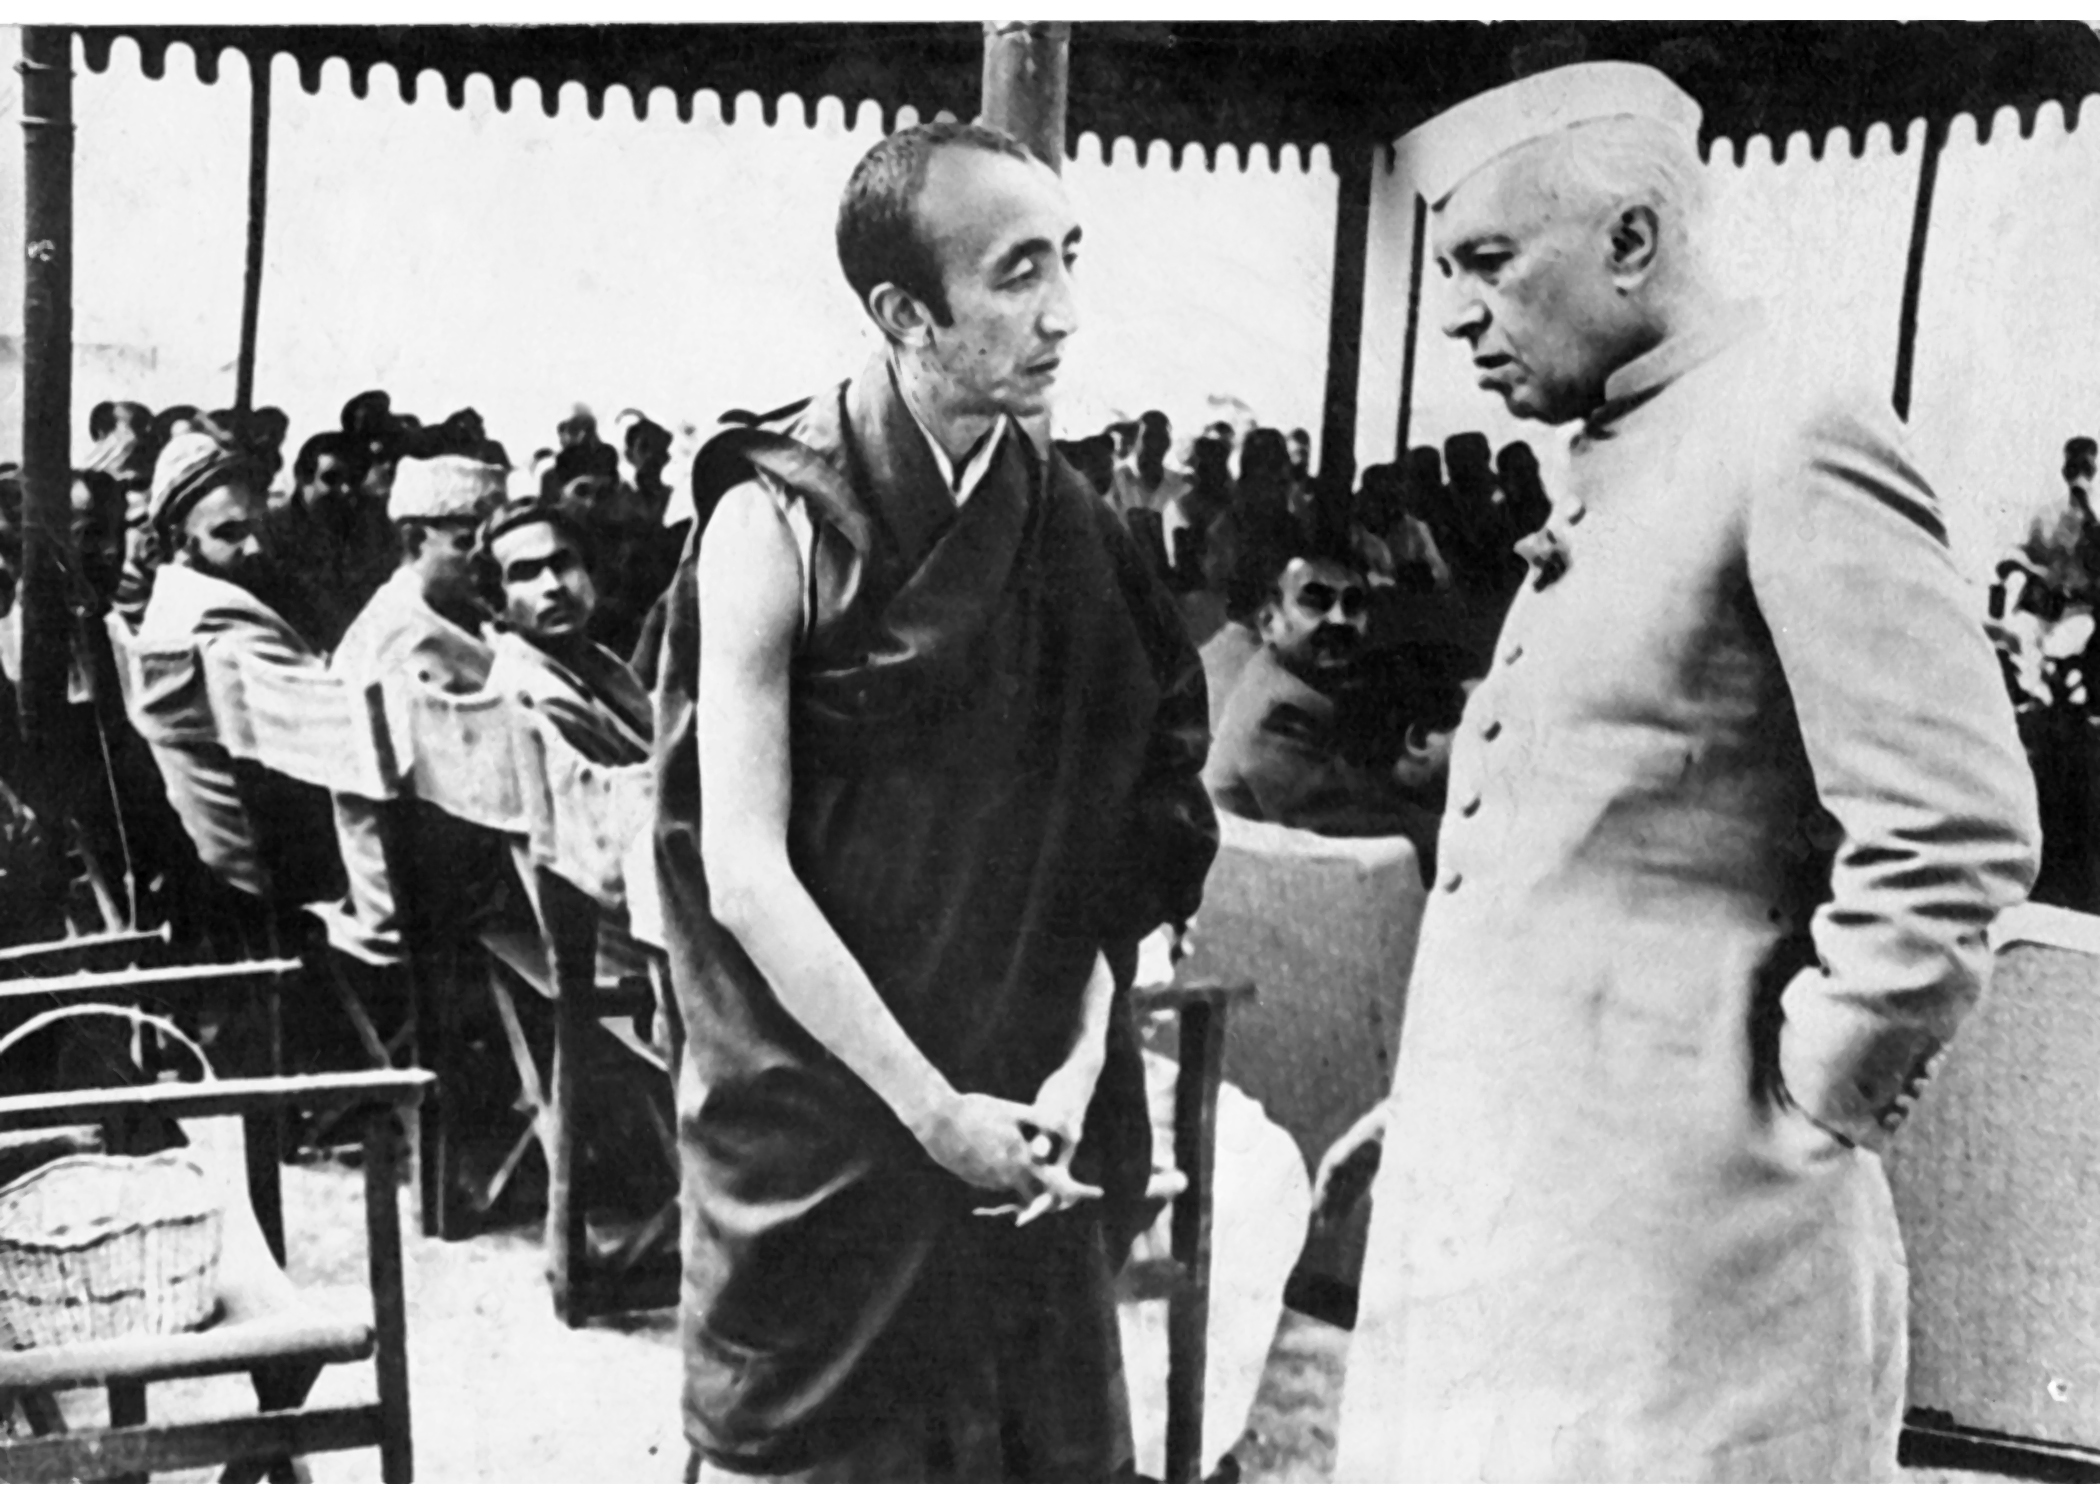 File photo of Bakula Rinpoche with India's first Prime Minister Pandit Nehru. (Source: Sonam Wangchuk)